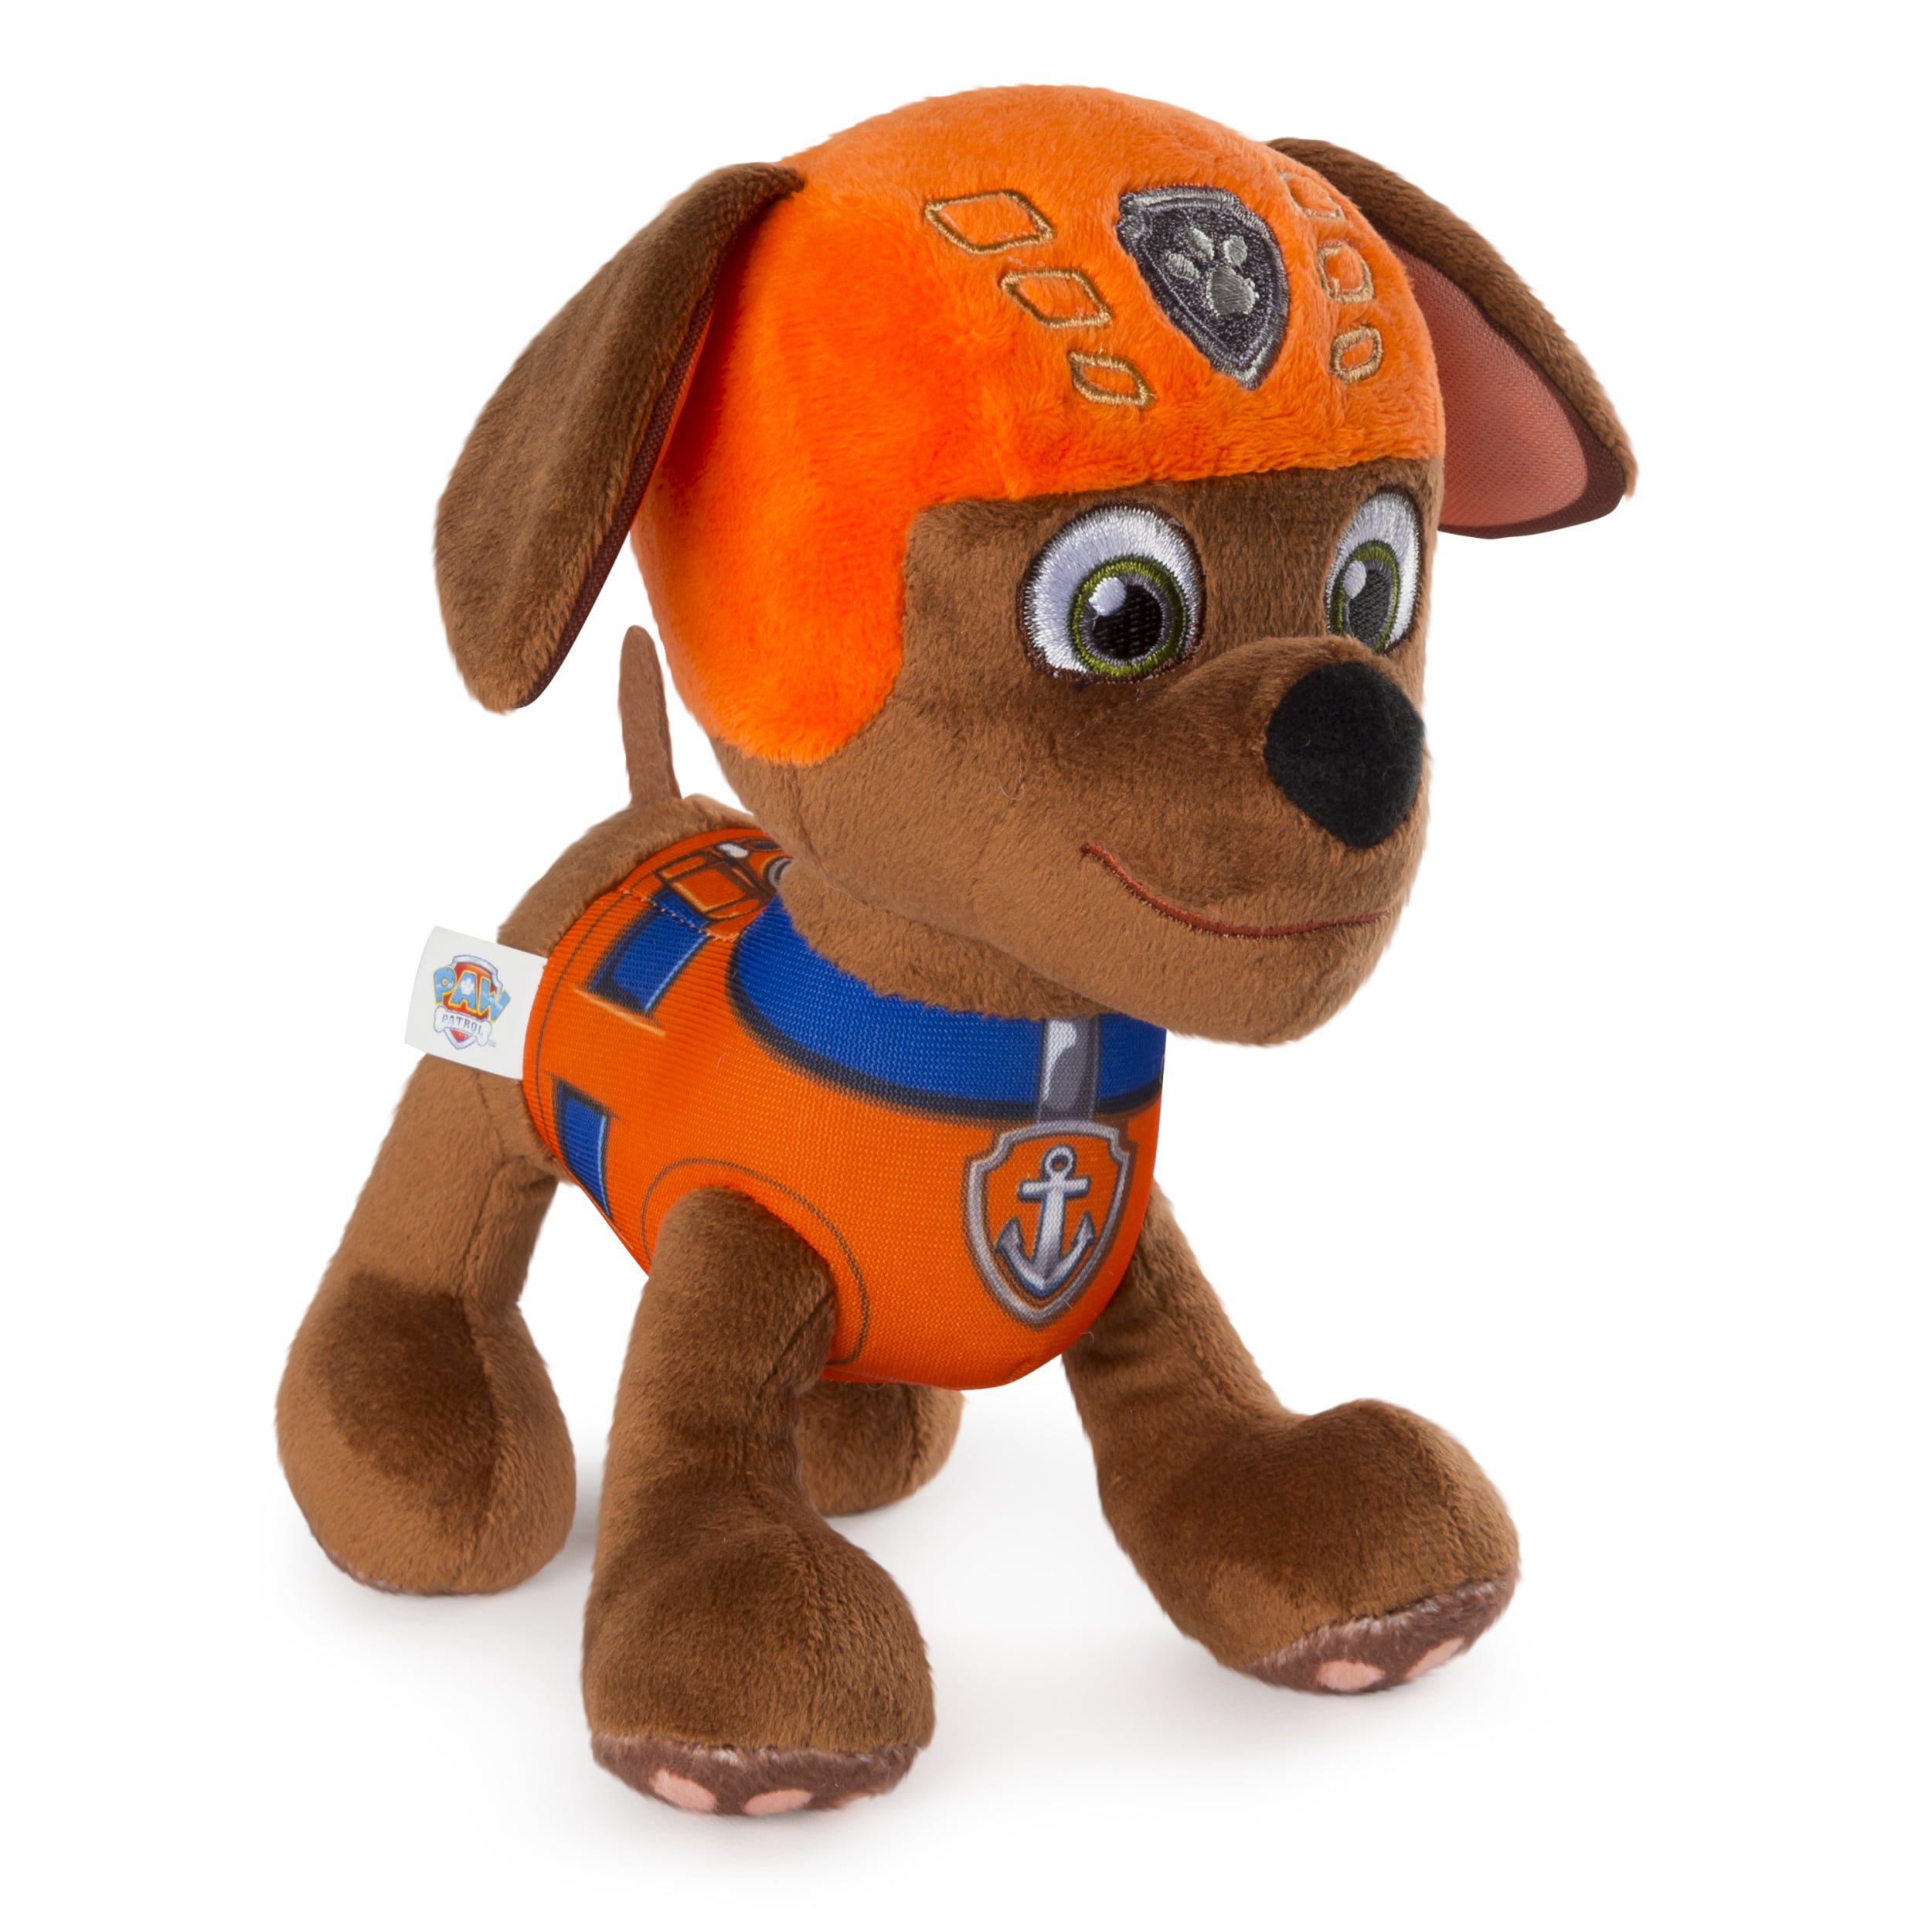 Paw Patrol 8” Skye Plush Toy for Ages Standing Plush with Stitched Detailing 